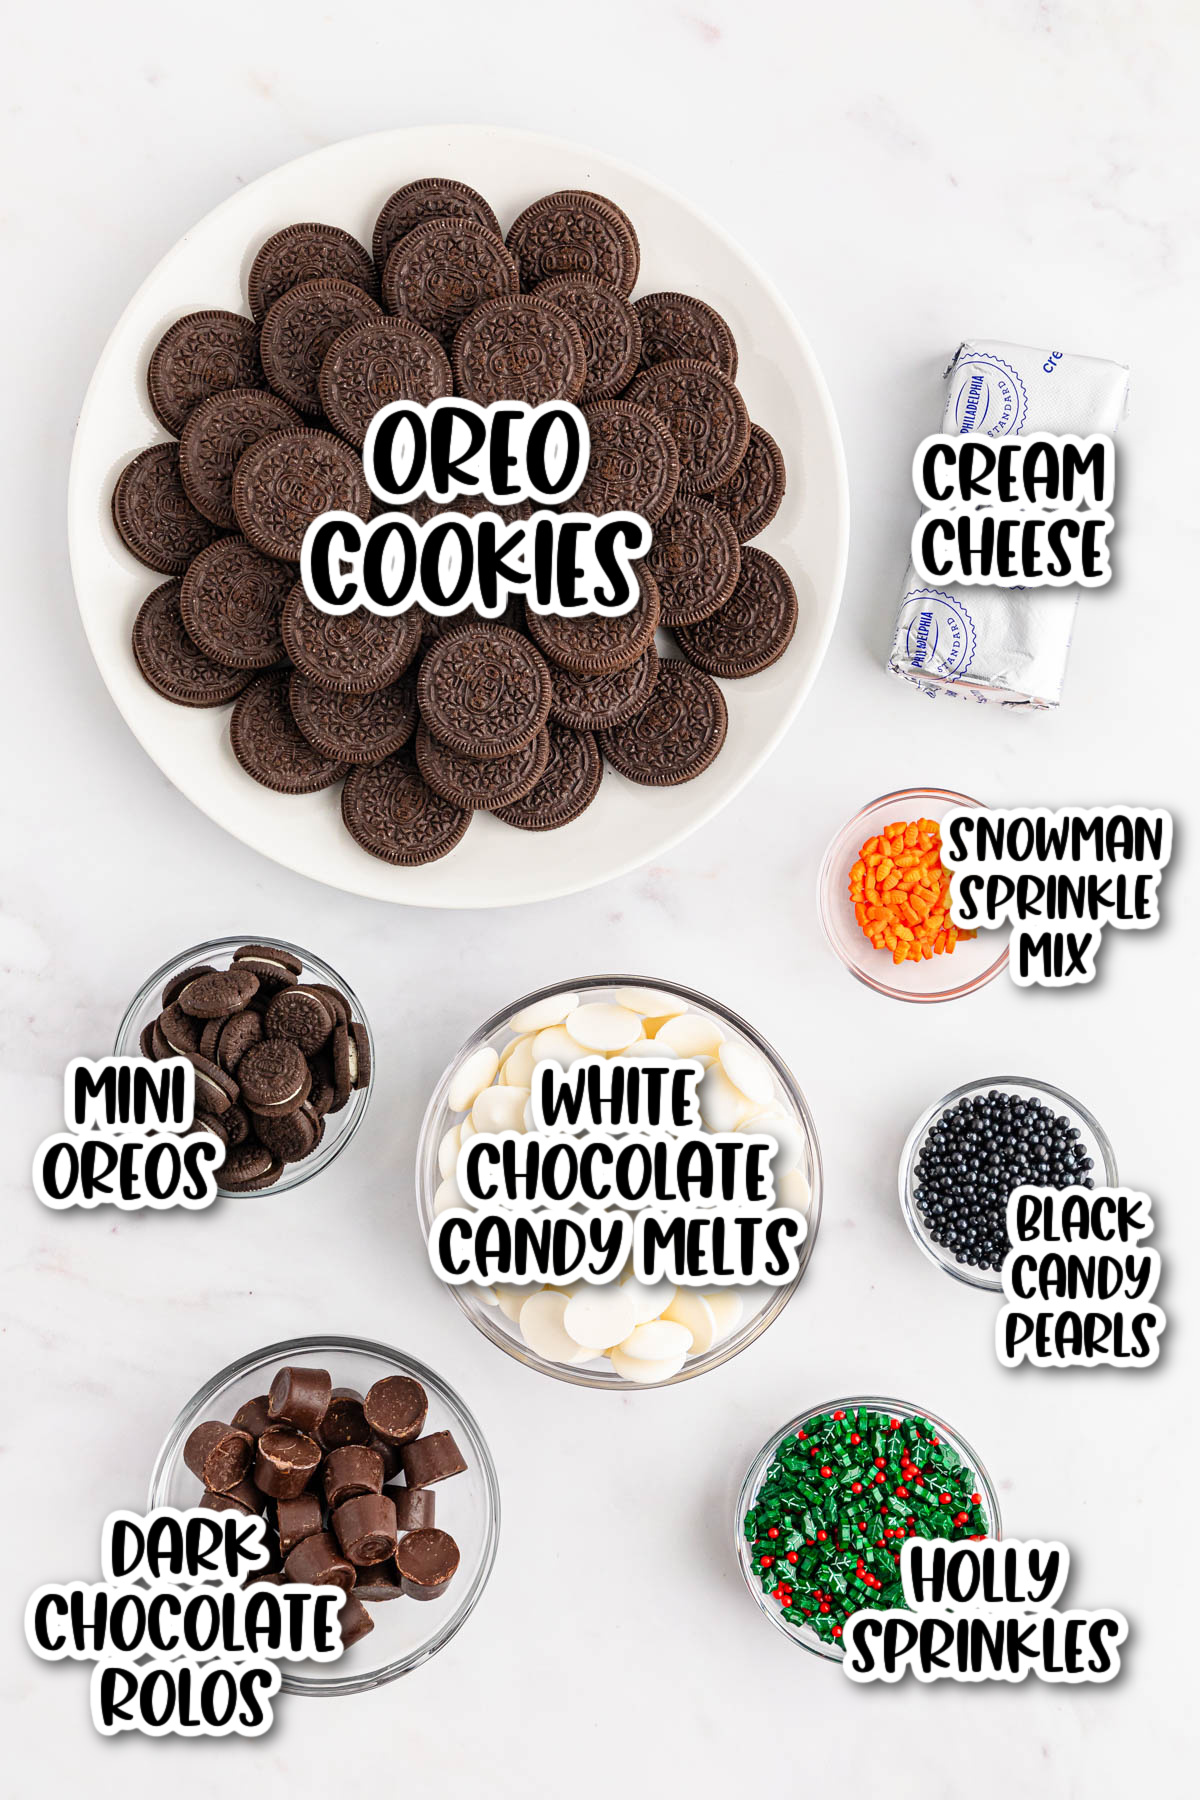 Oreo cookie ingredients on a white plate.